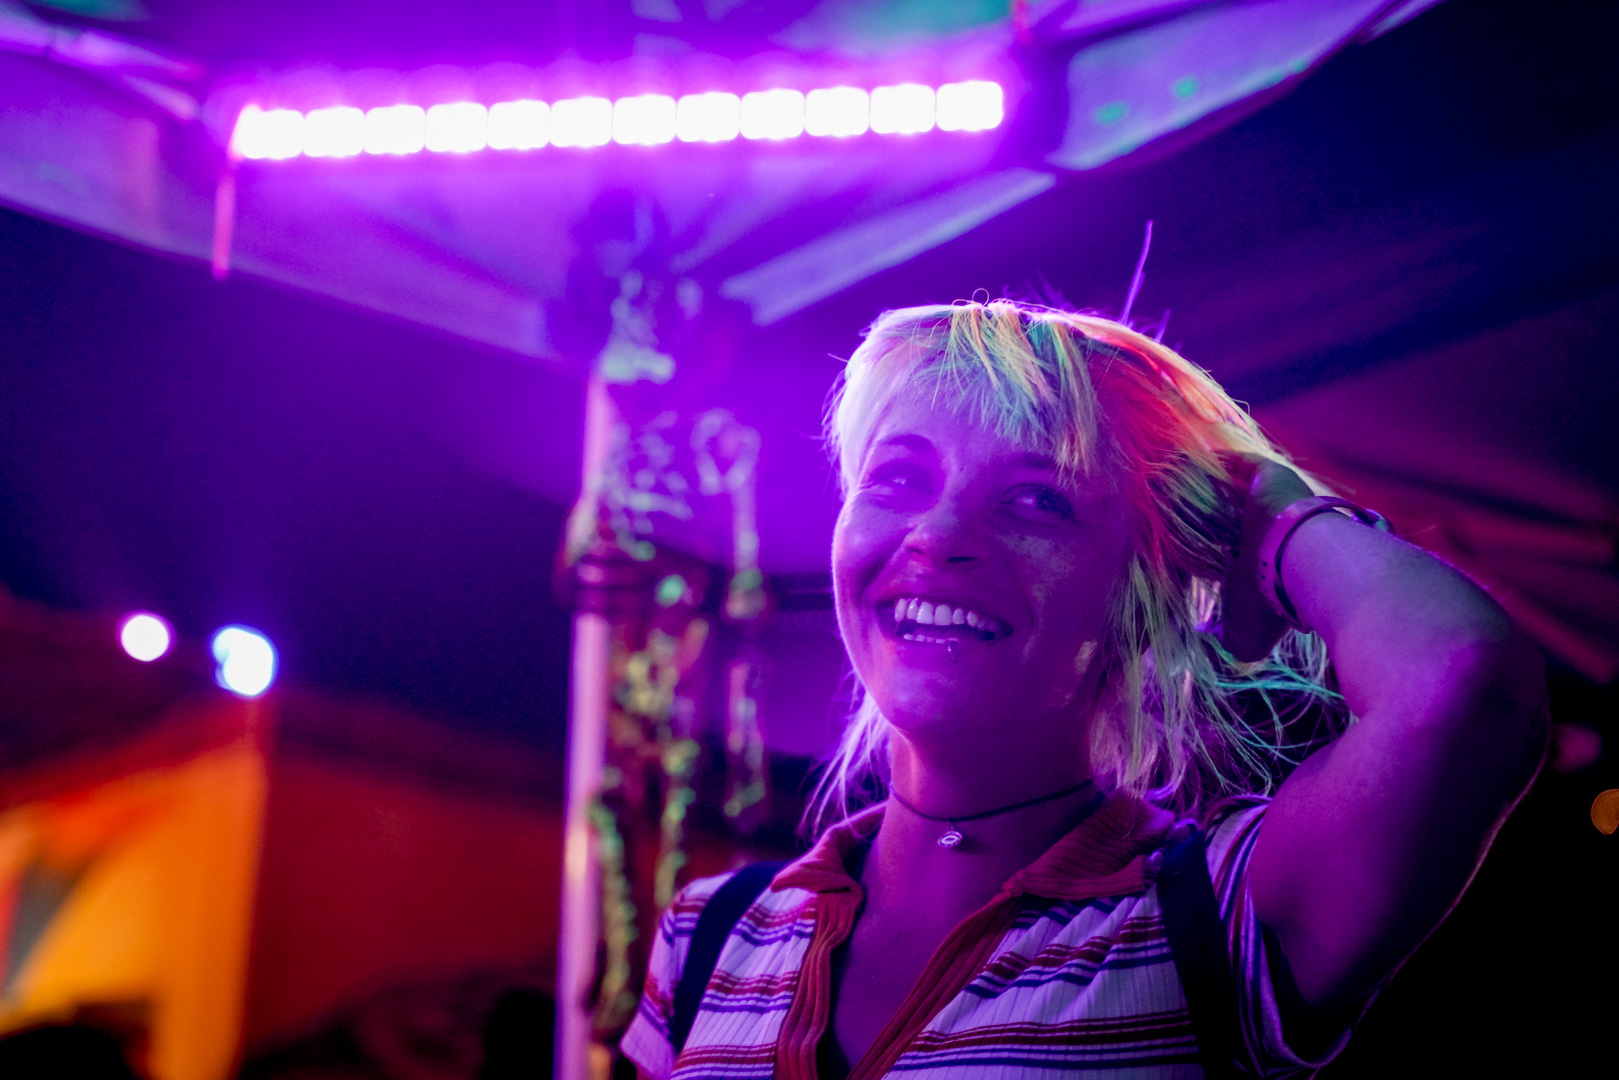 A woman smiling with neon hair under blacklight